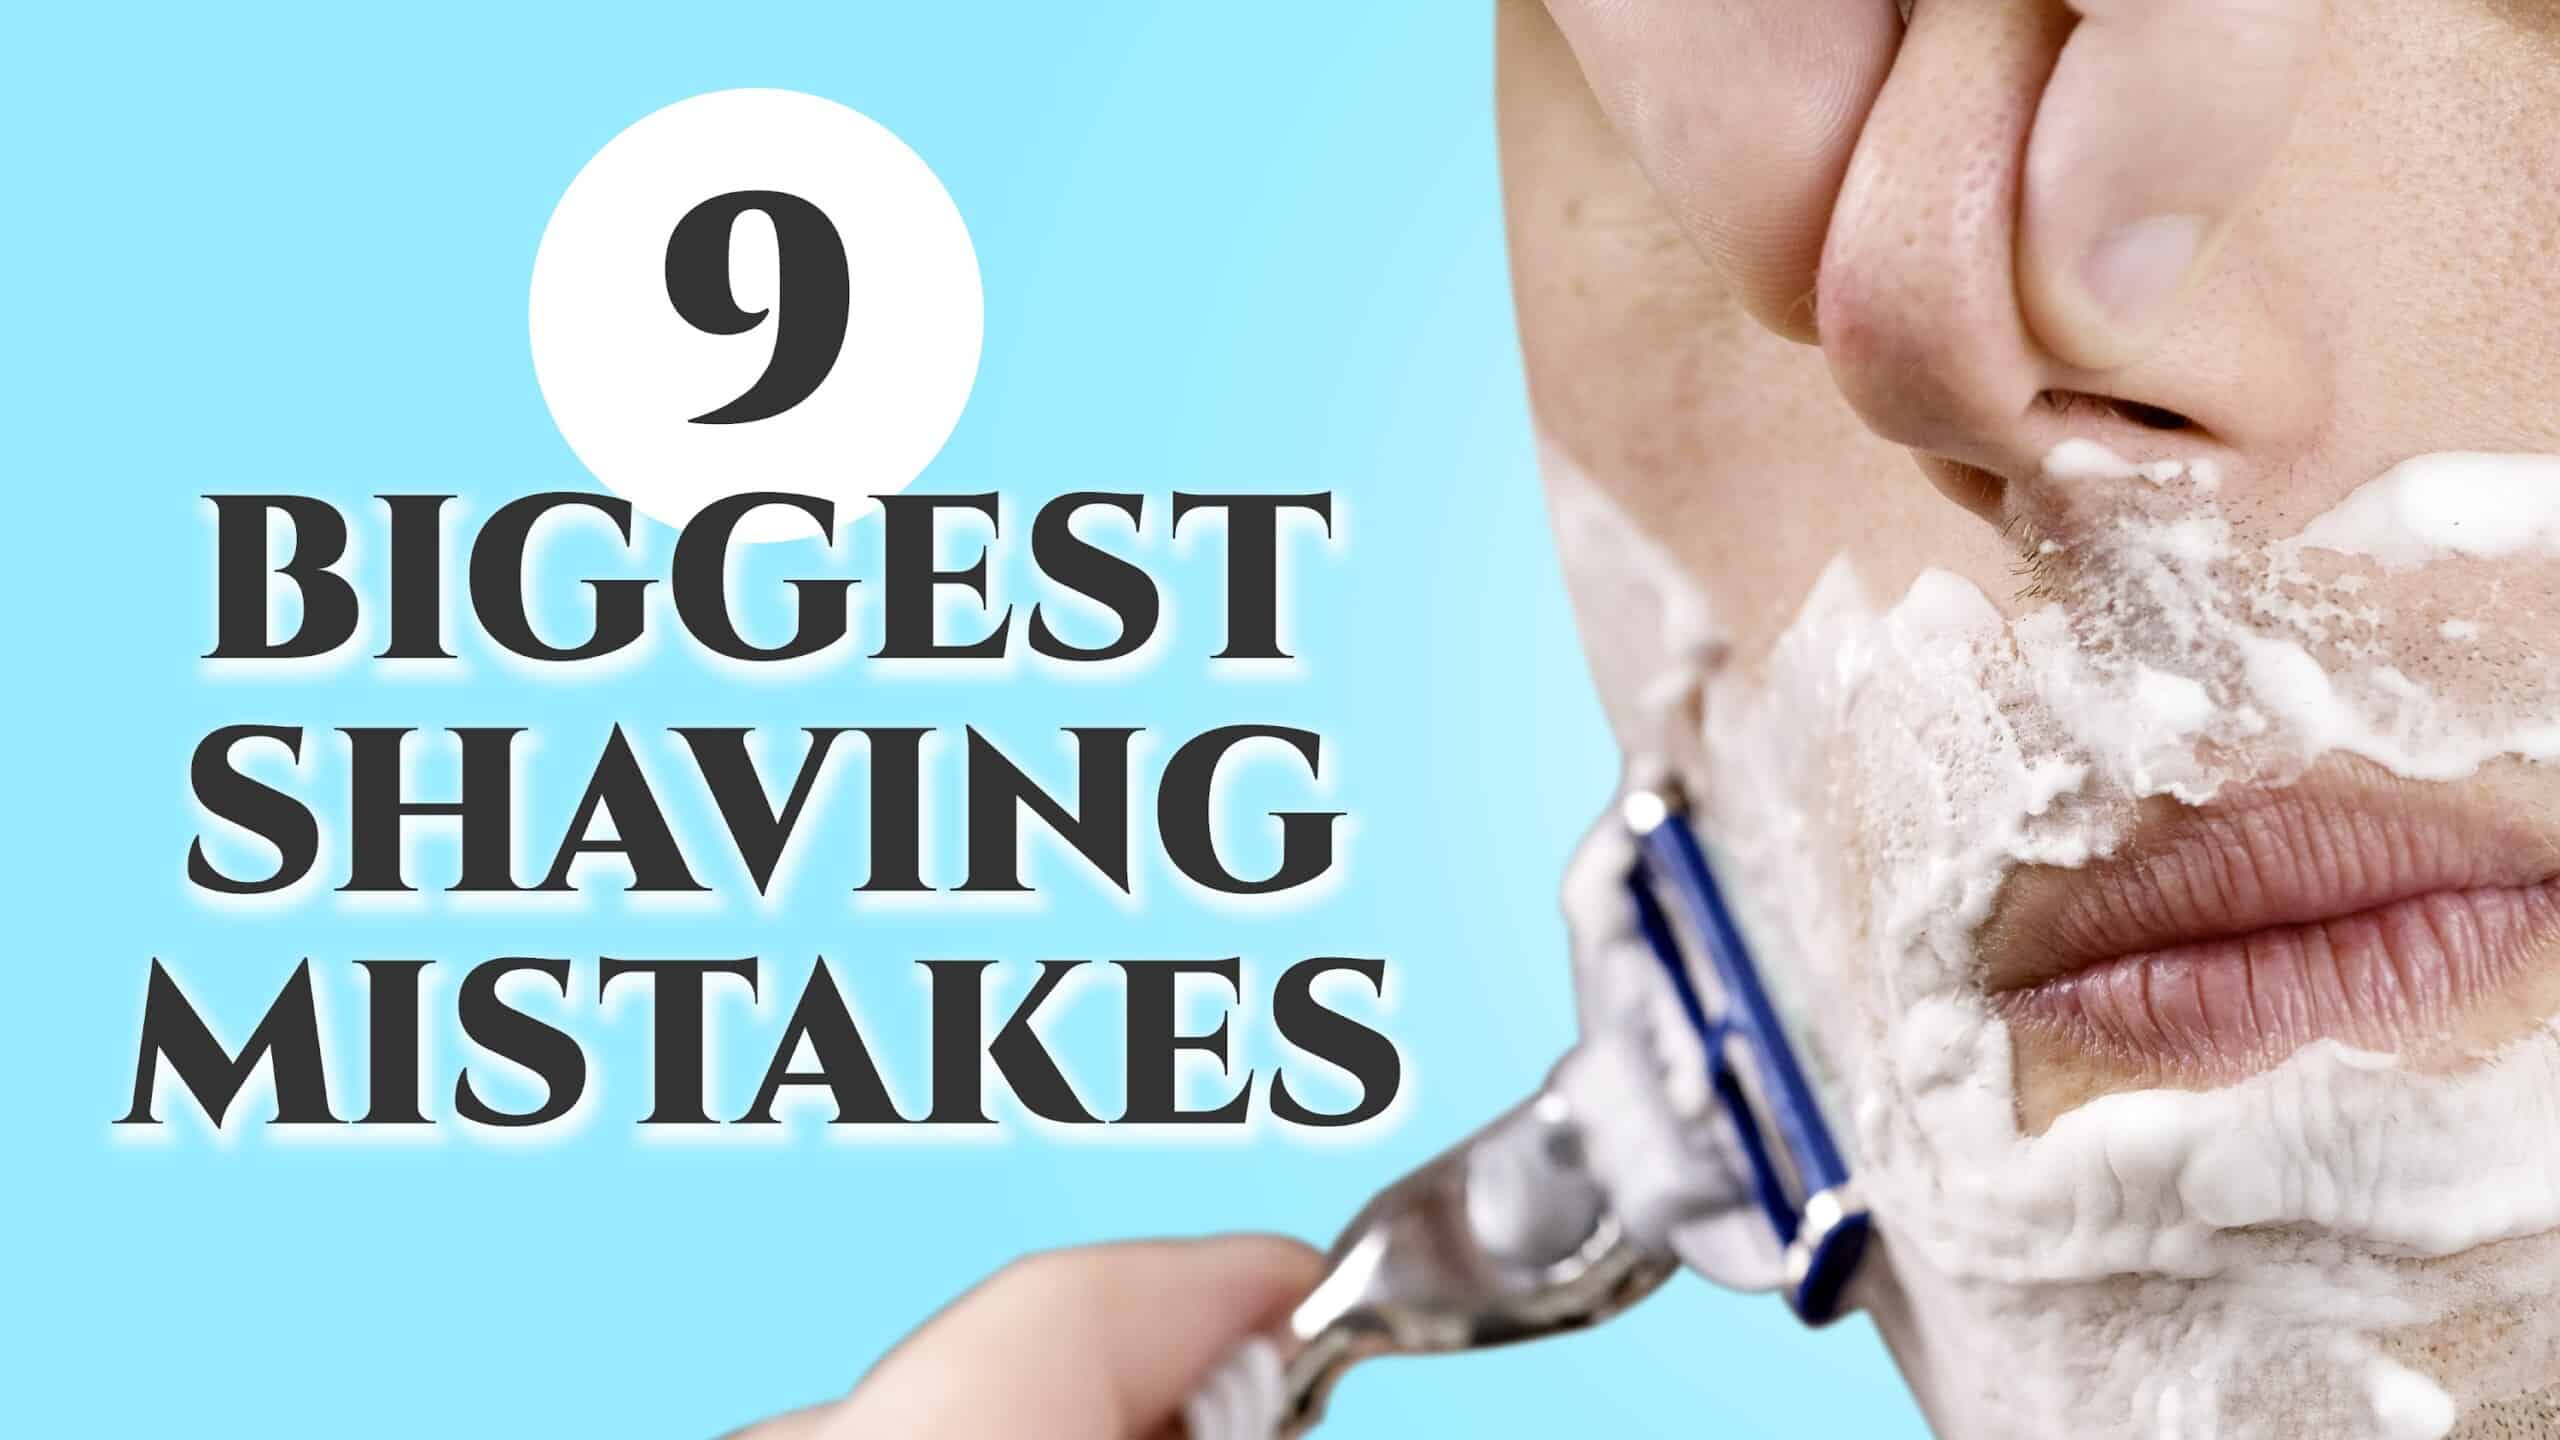 9 biggest shaving mistakes 3840x2160 scaled